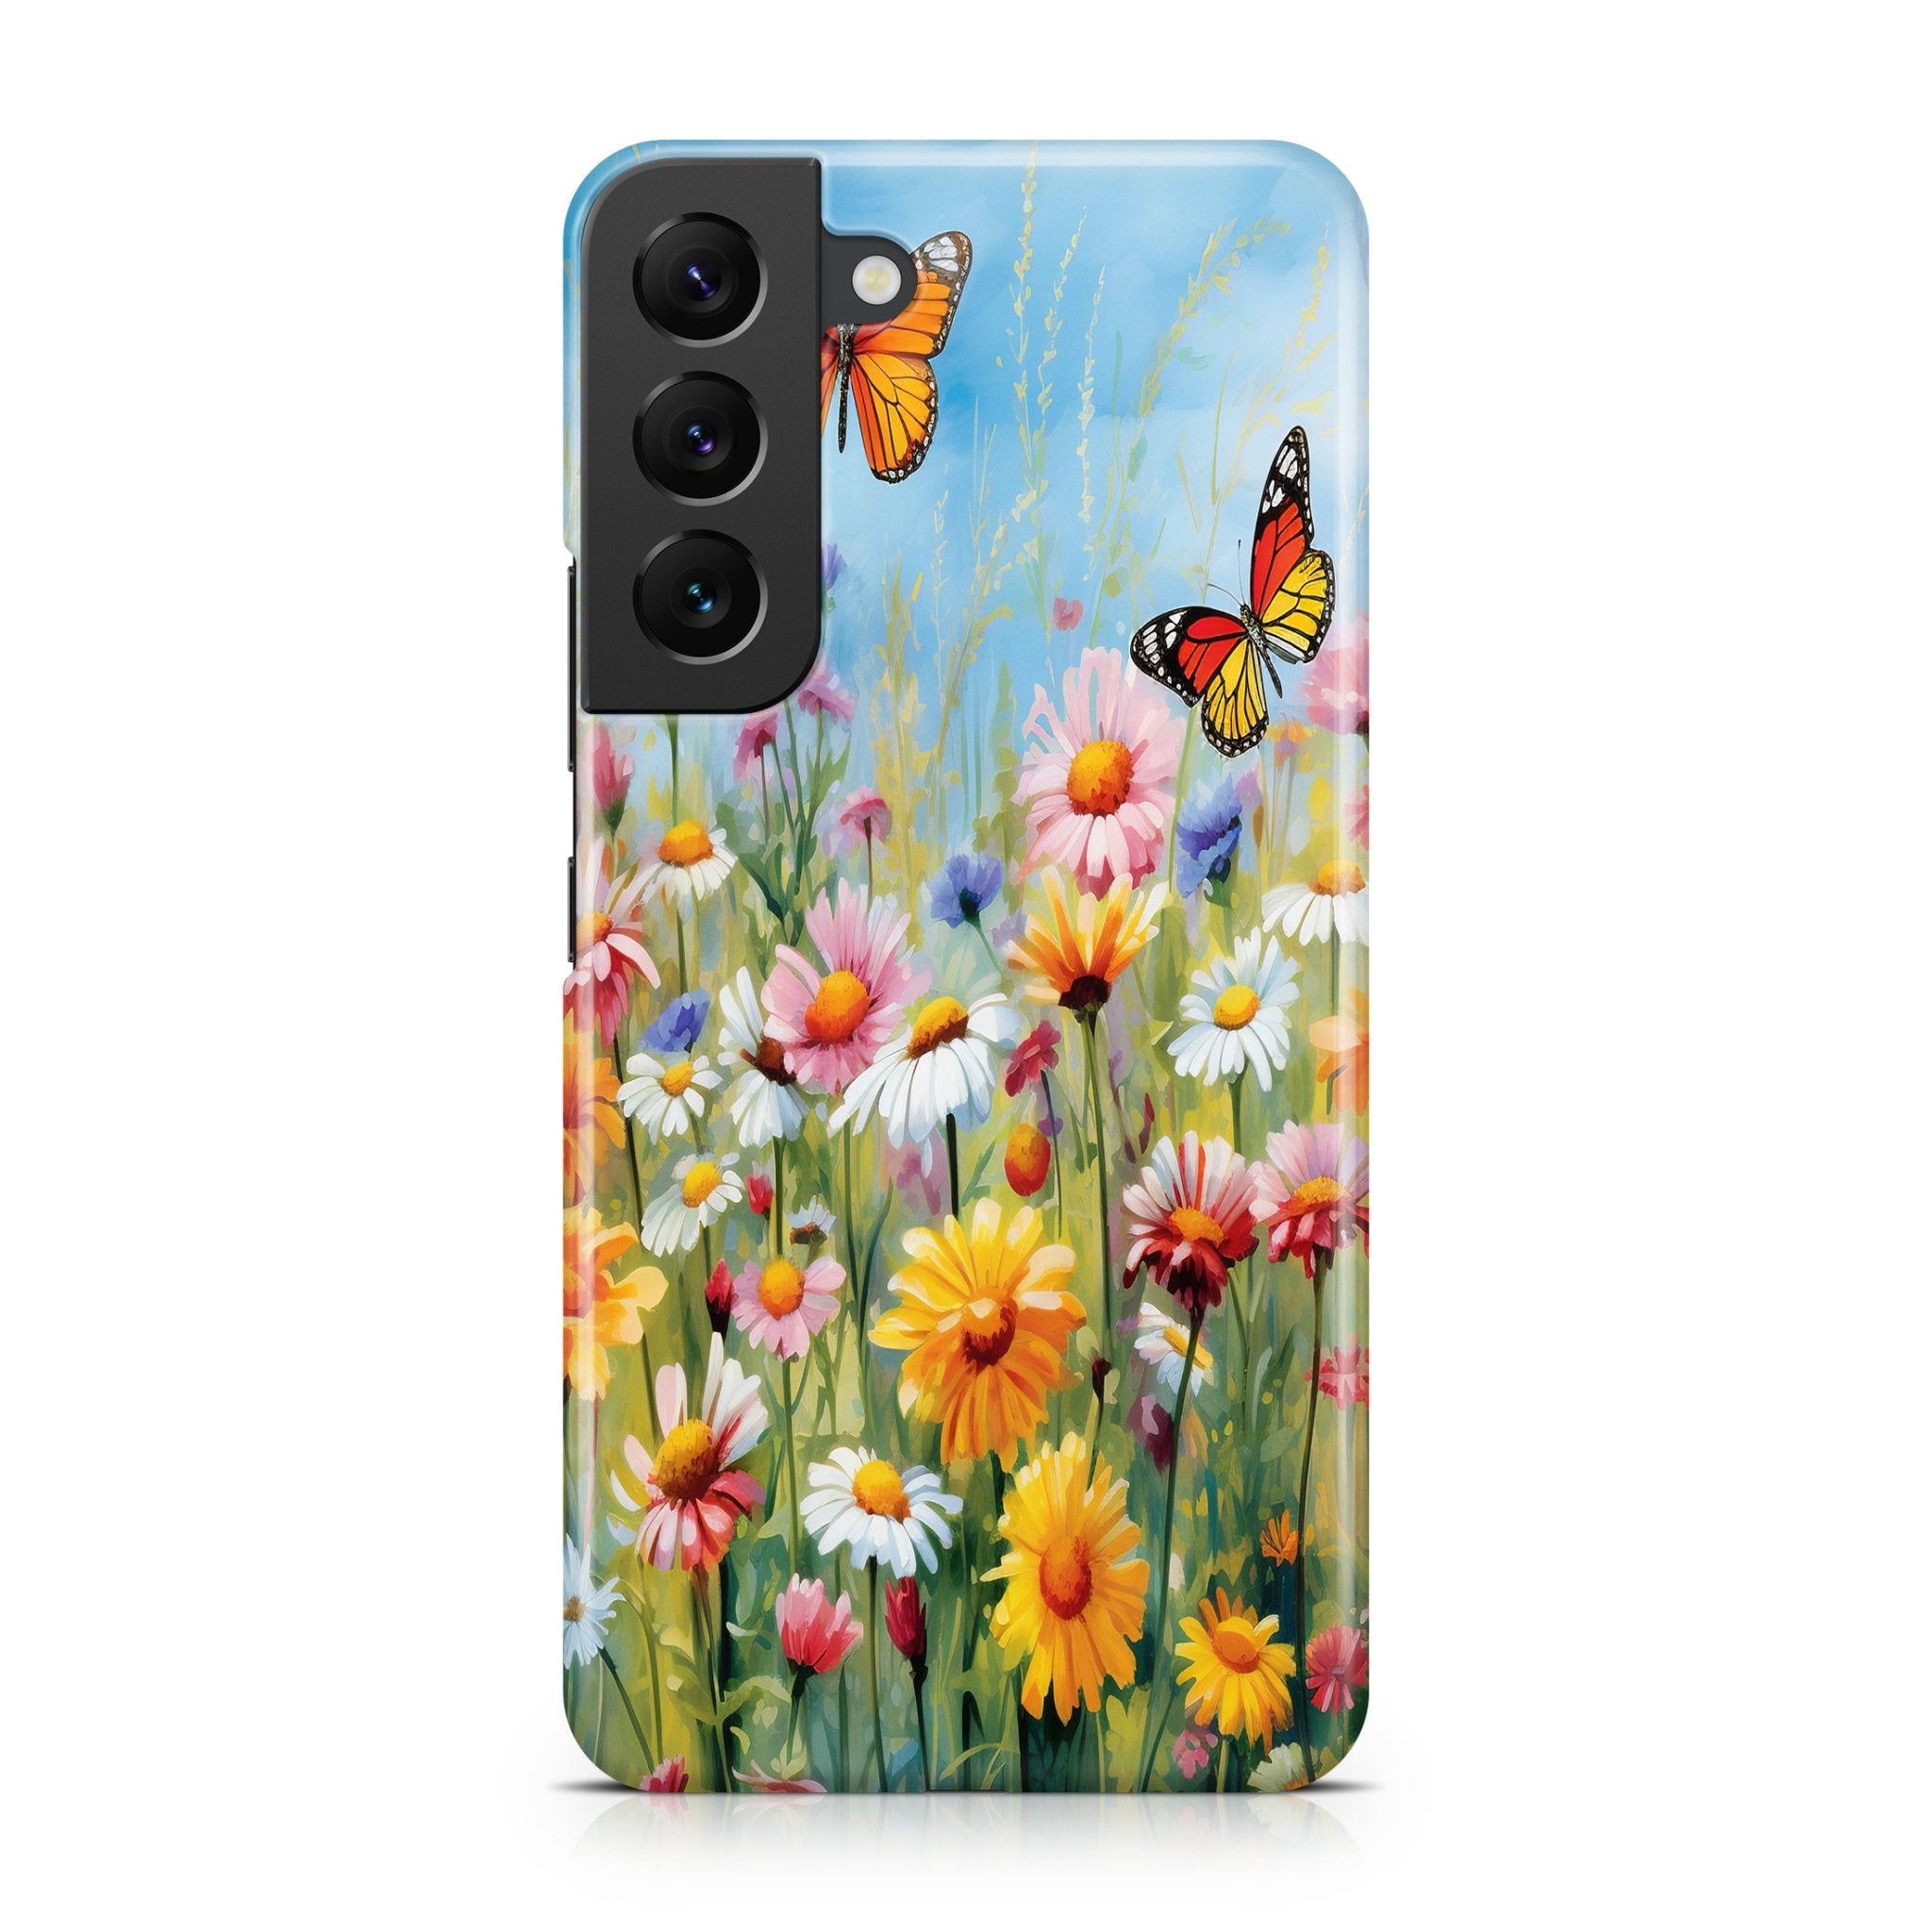 Spring Blossom - Samsung phone case designs by CaseSwagger